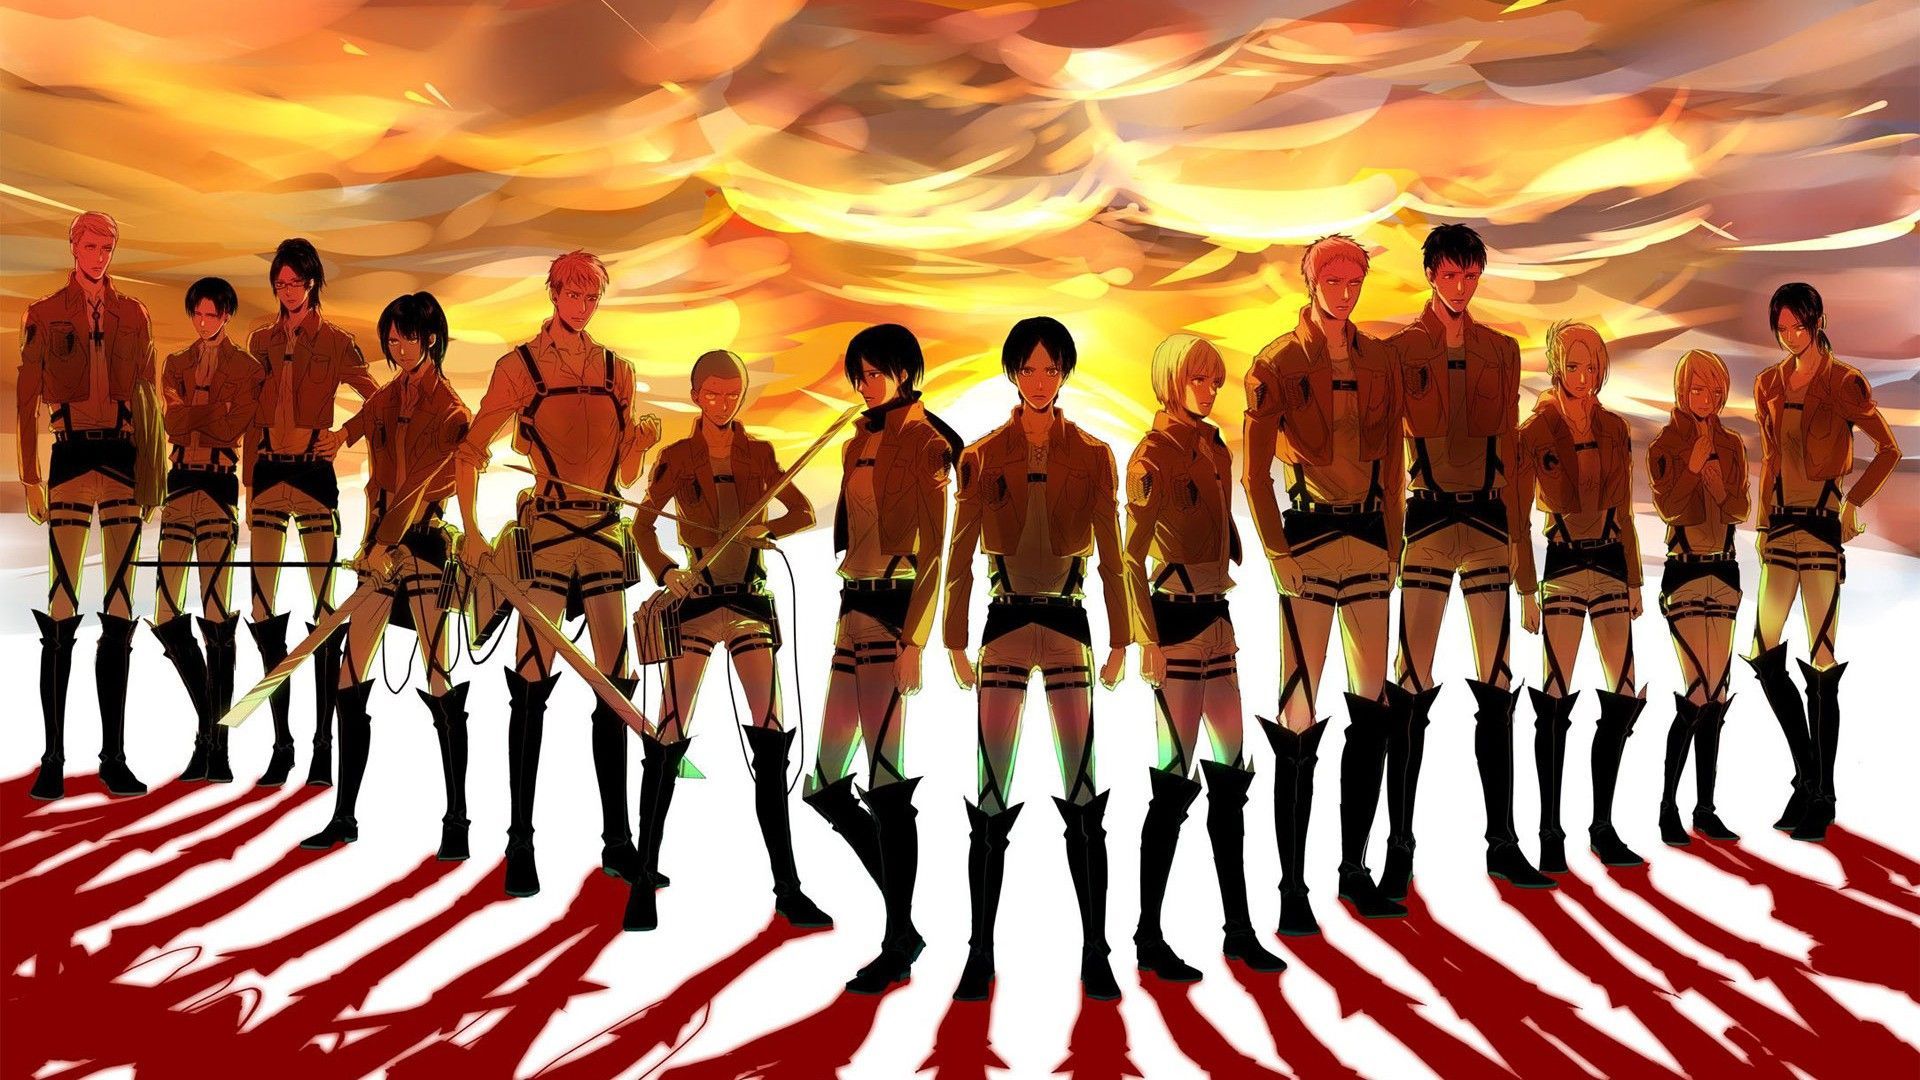 Squad and Survey Corps Computer Wallpaper, Desktop Backgroundx1080. Attack on titan anime, Attack on titan, Attack on titan levi